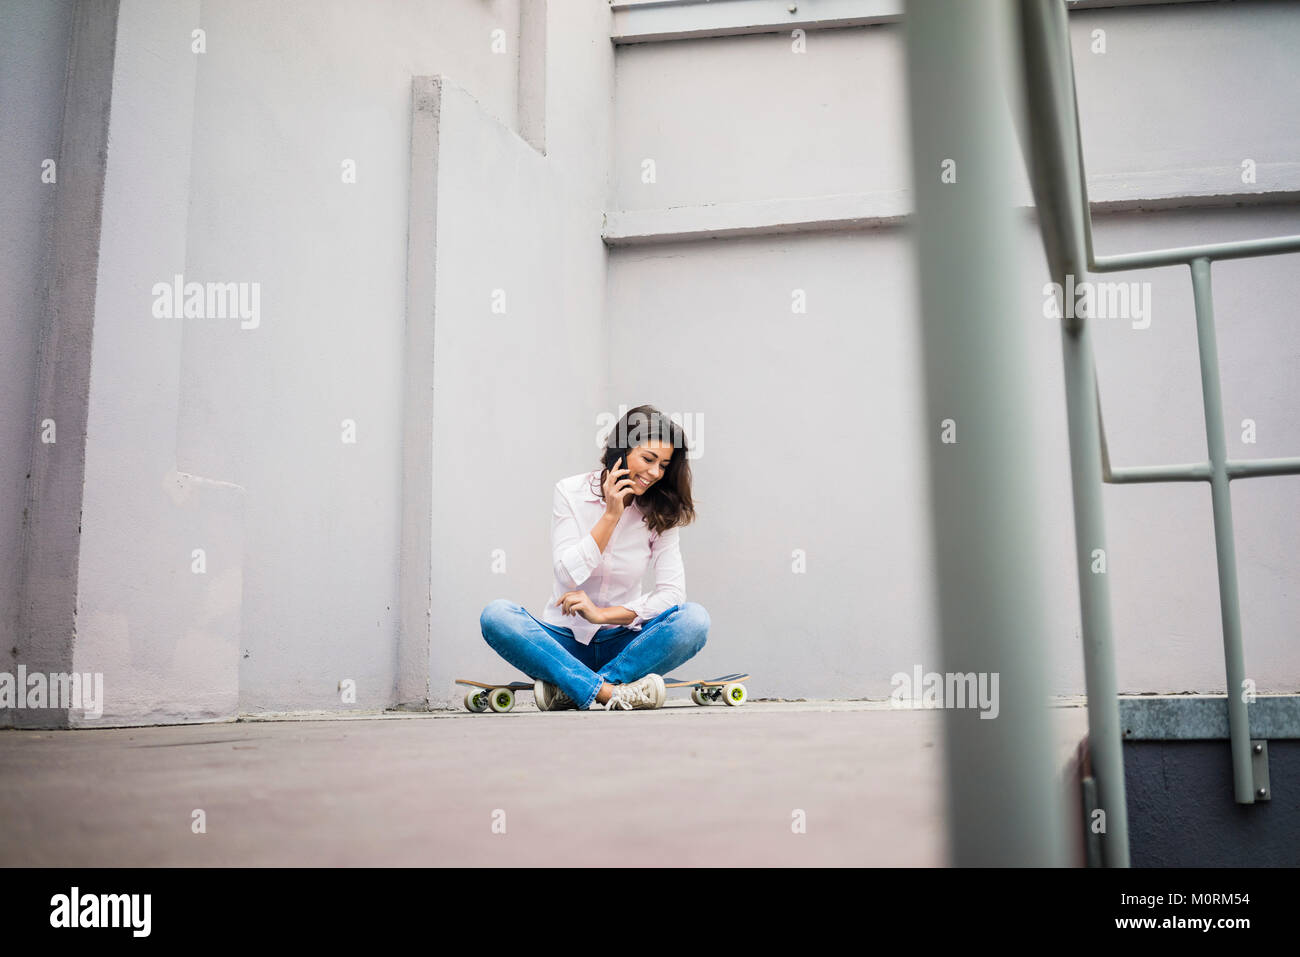 Smiling young woman on the phone sitting on skateboard Banque D'Images